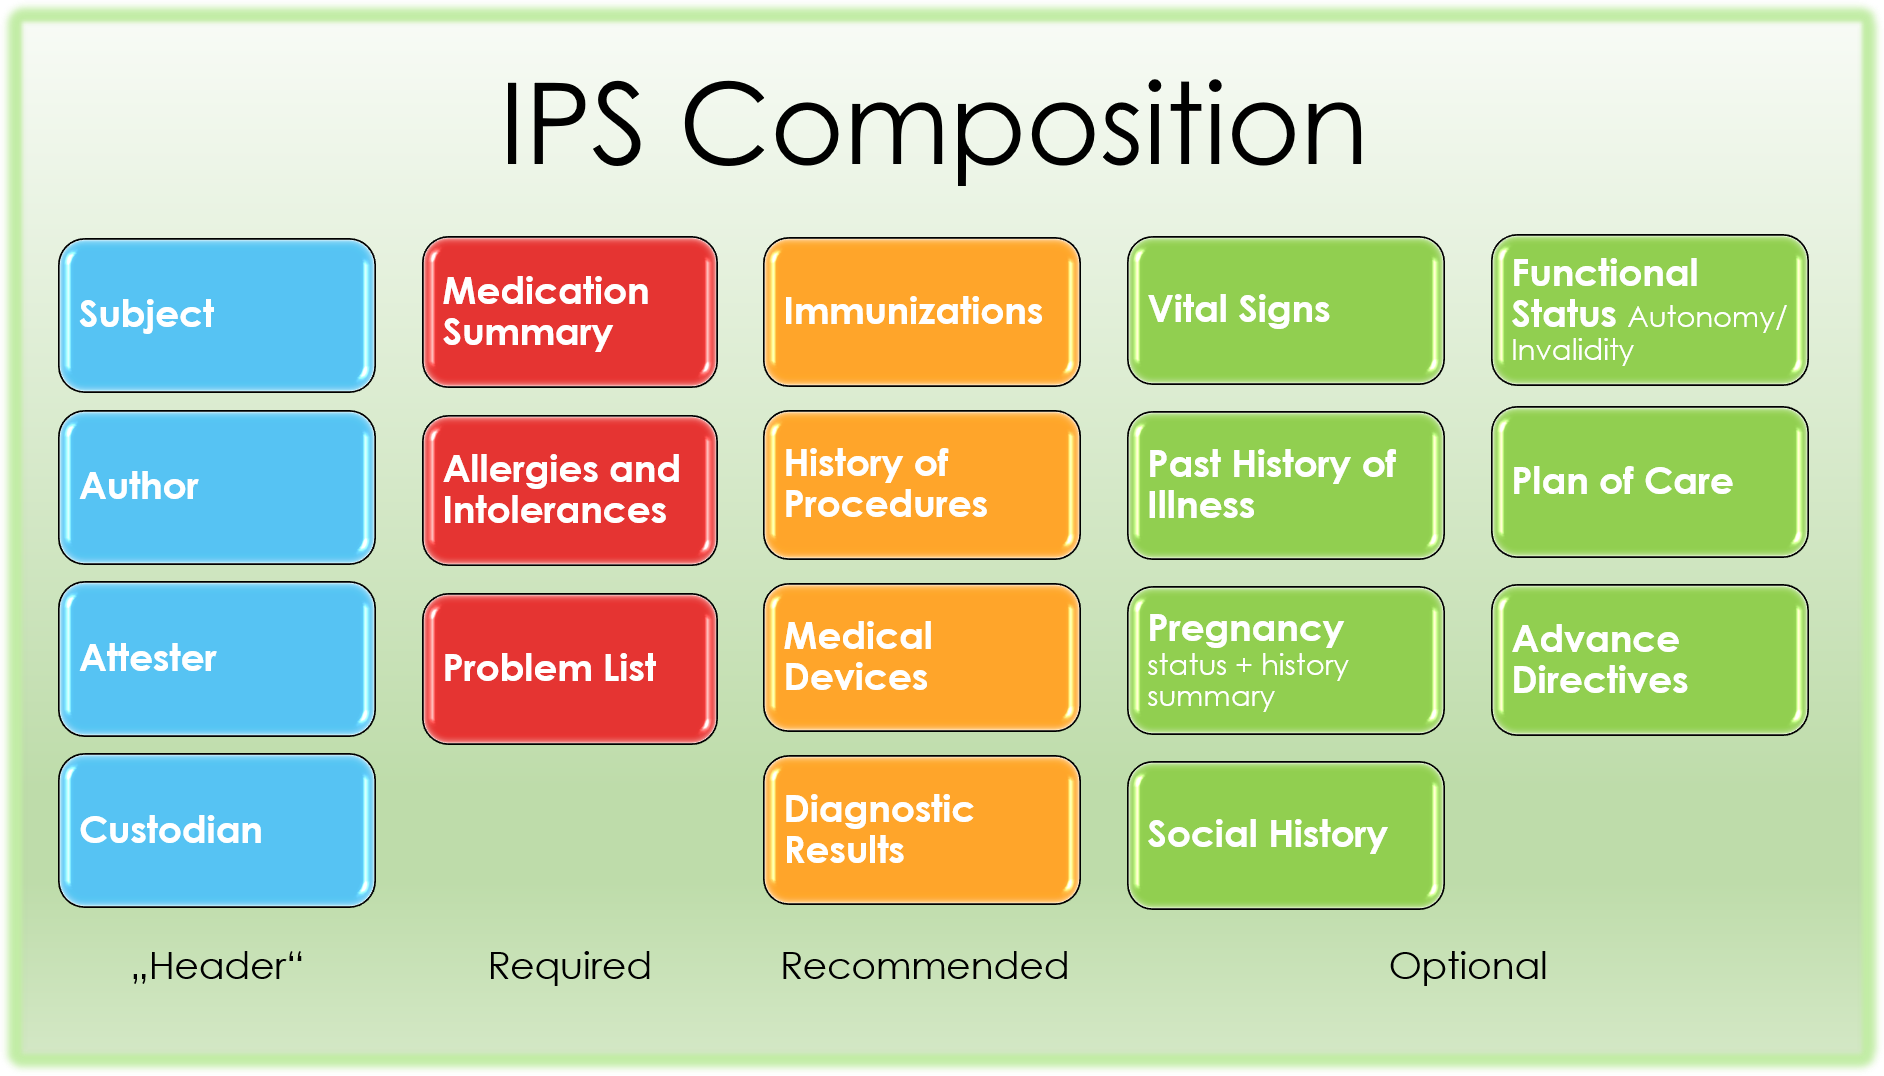 Figure 2: The IPS composition